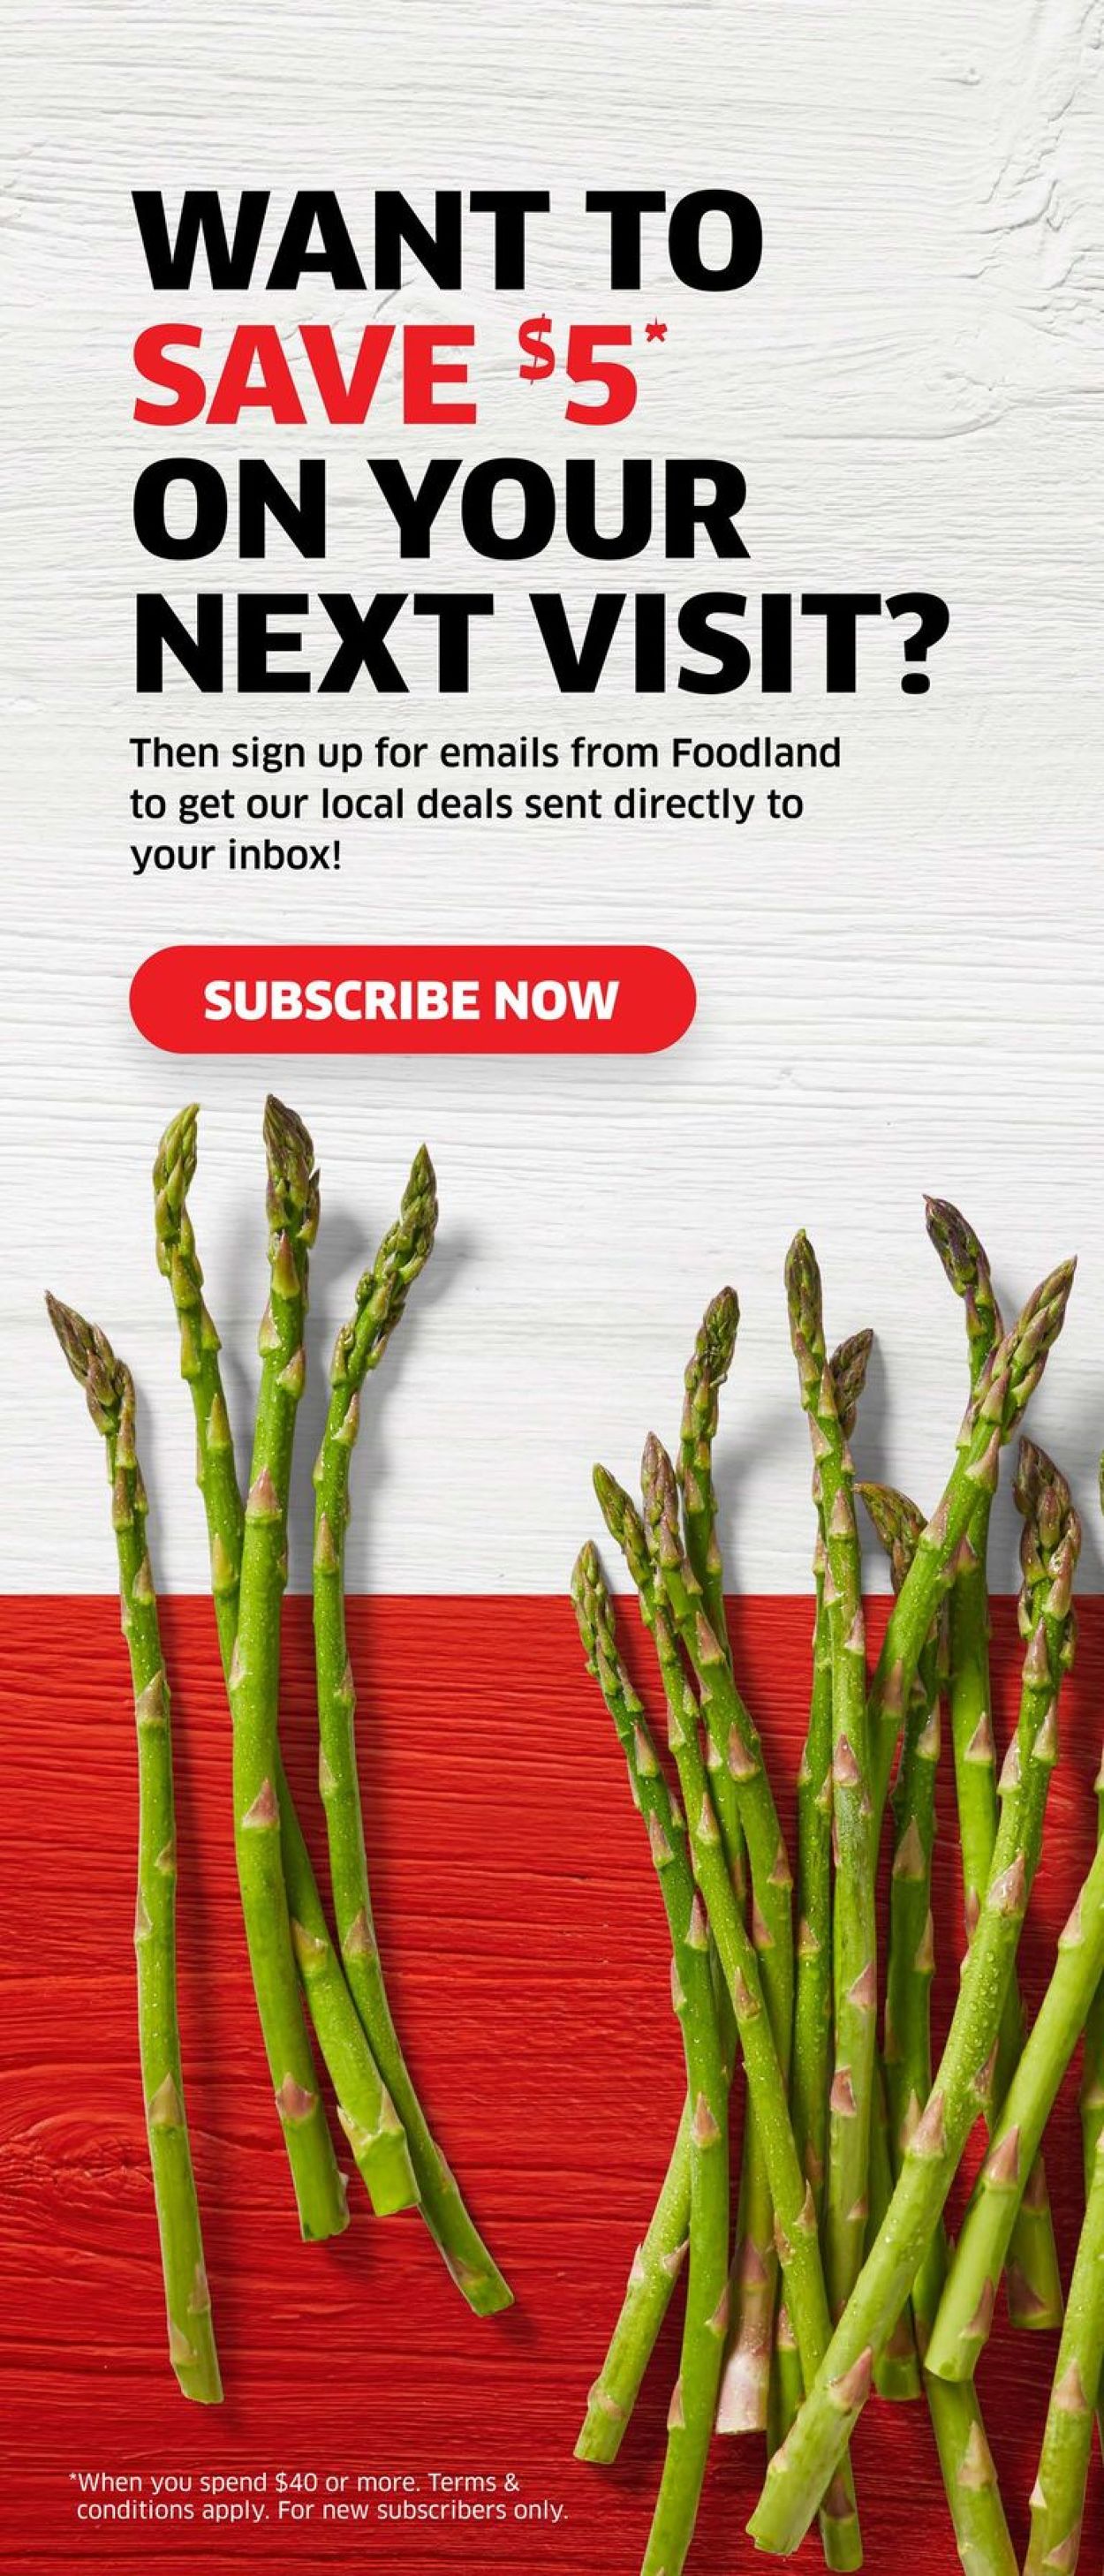 Foodland Flyer from 11/18/2021